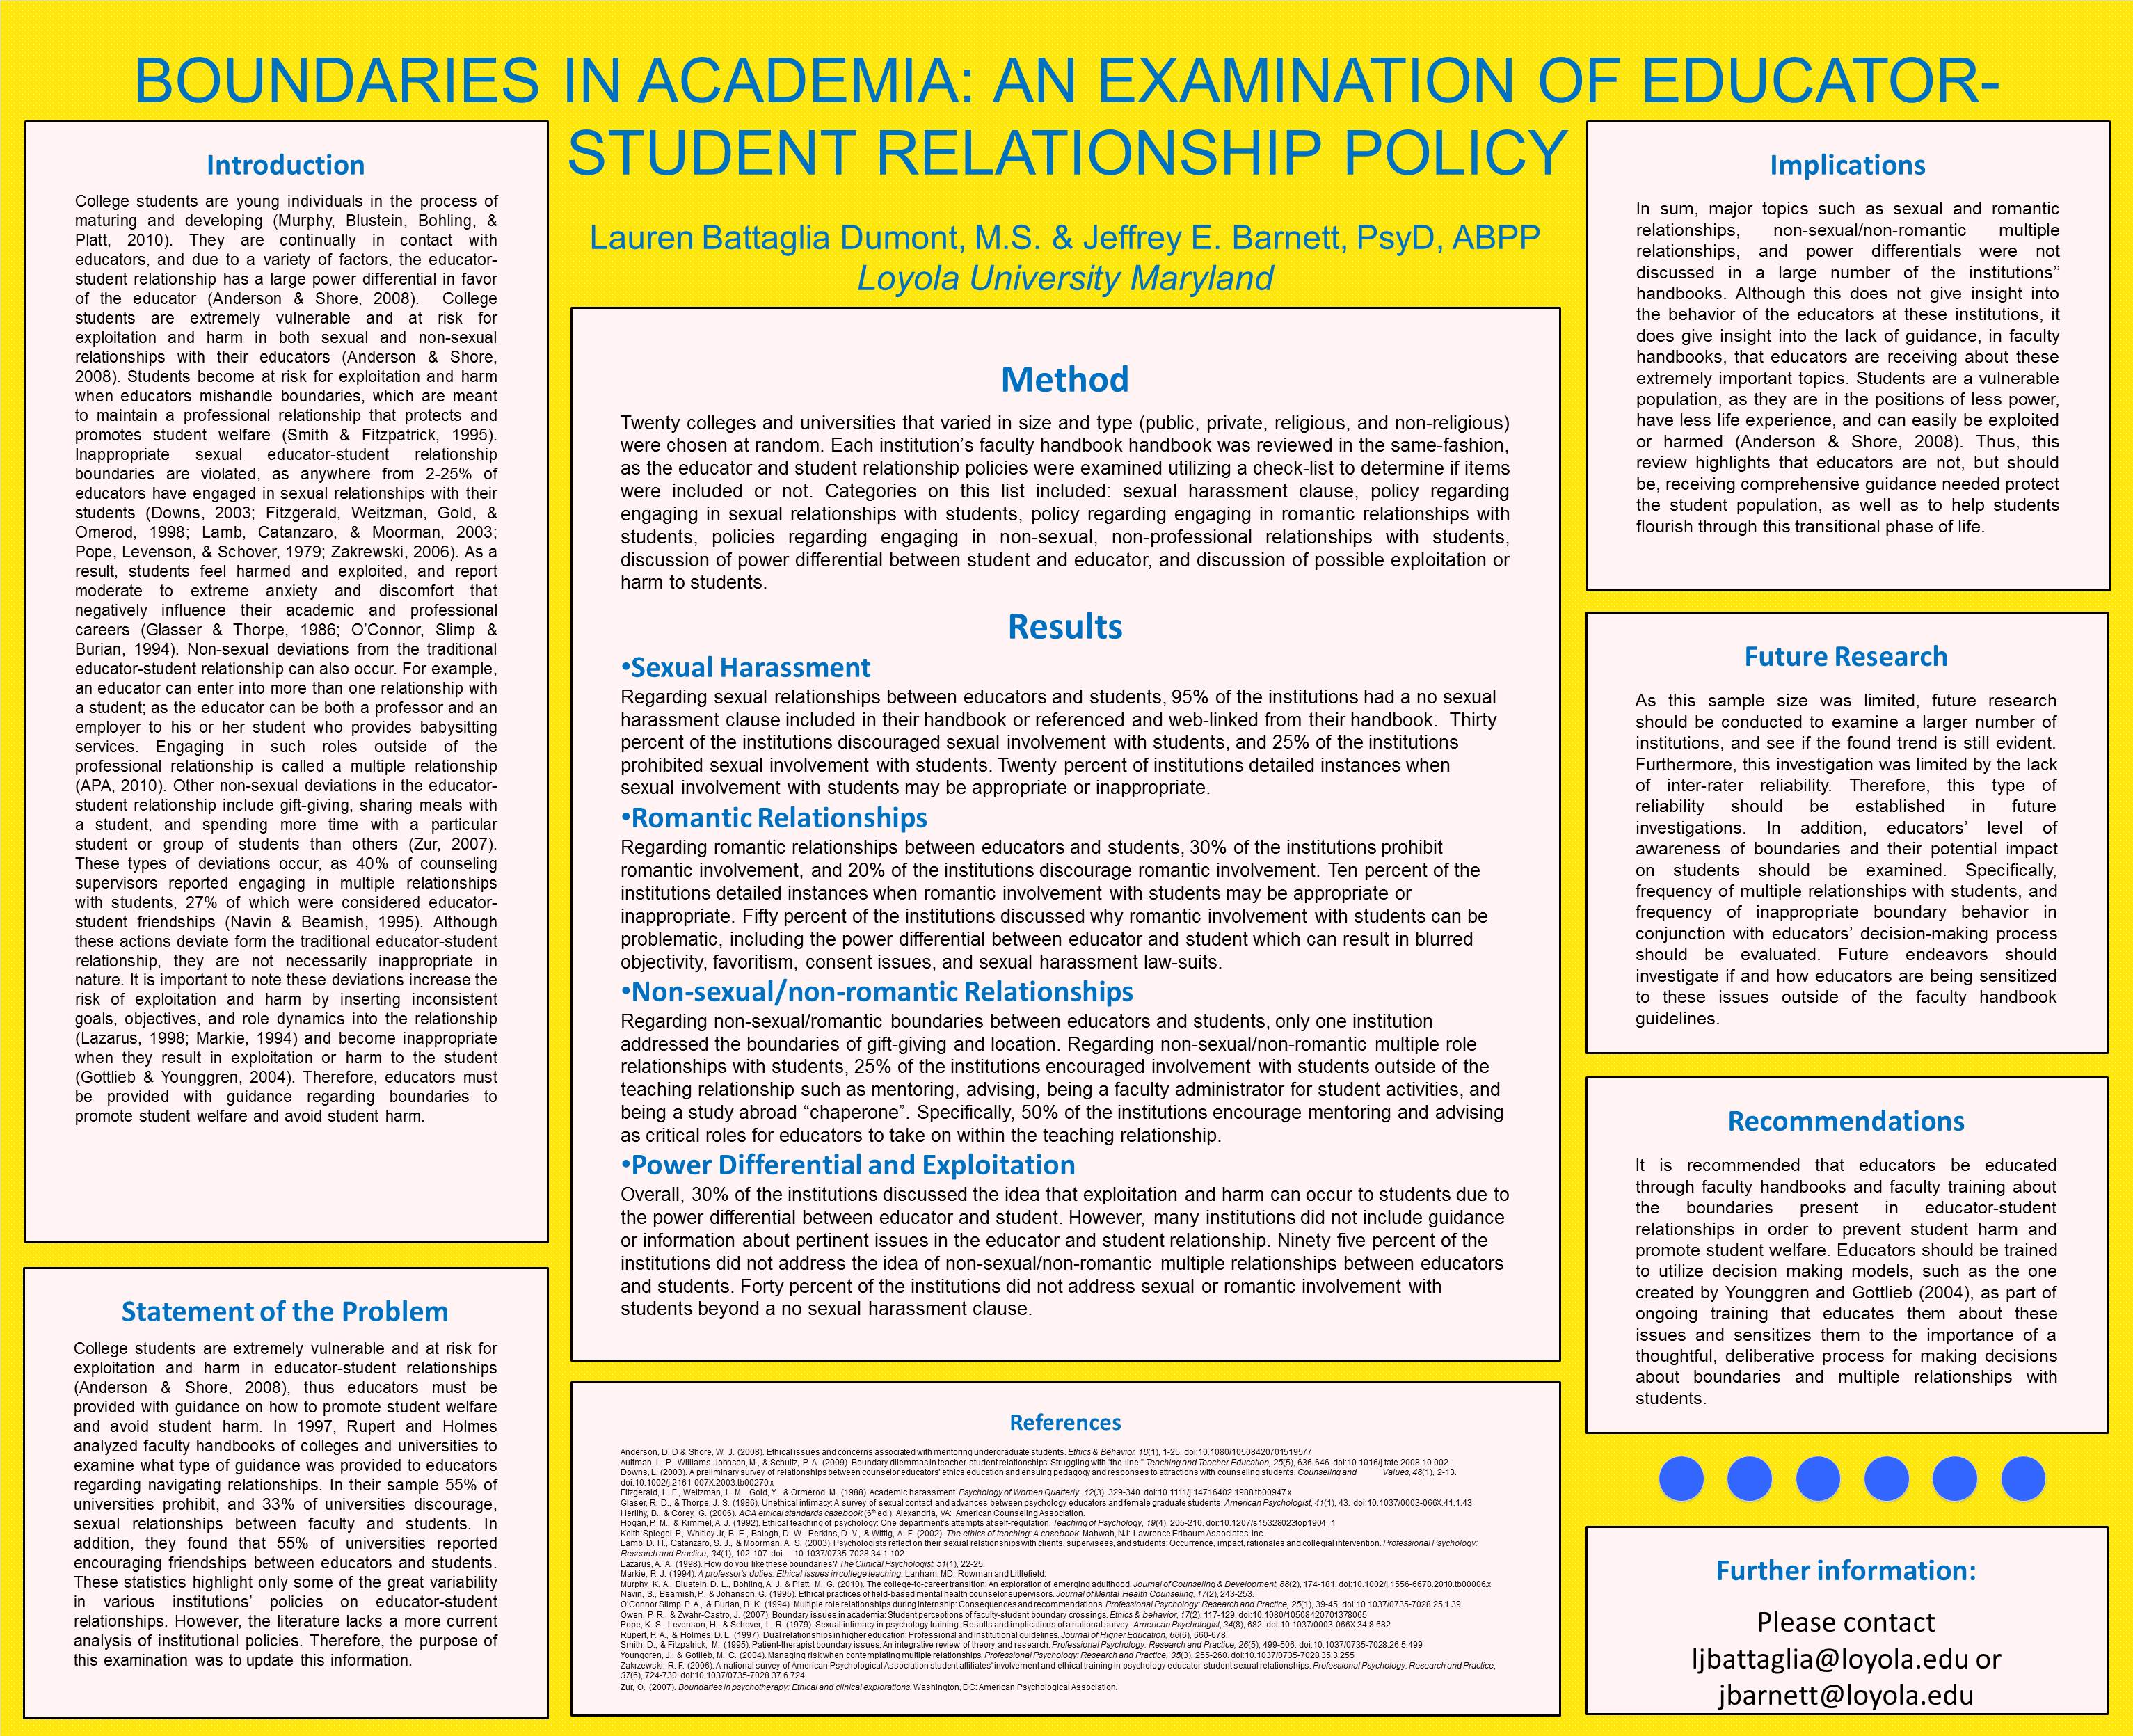 poster image: 'Boundaries in Academia: An Examination of Educator-Student Relationship Policy'